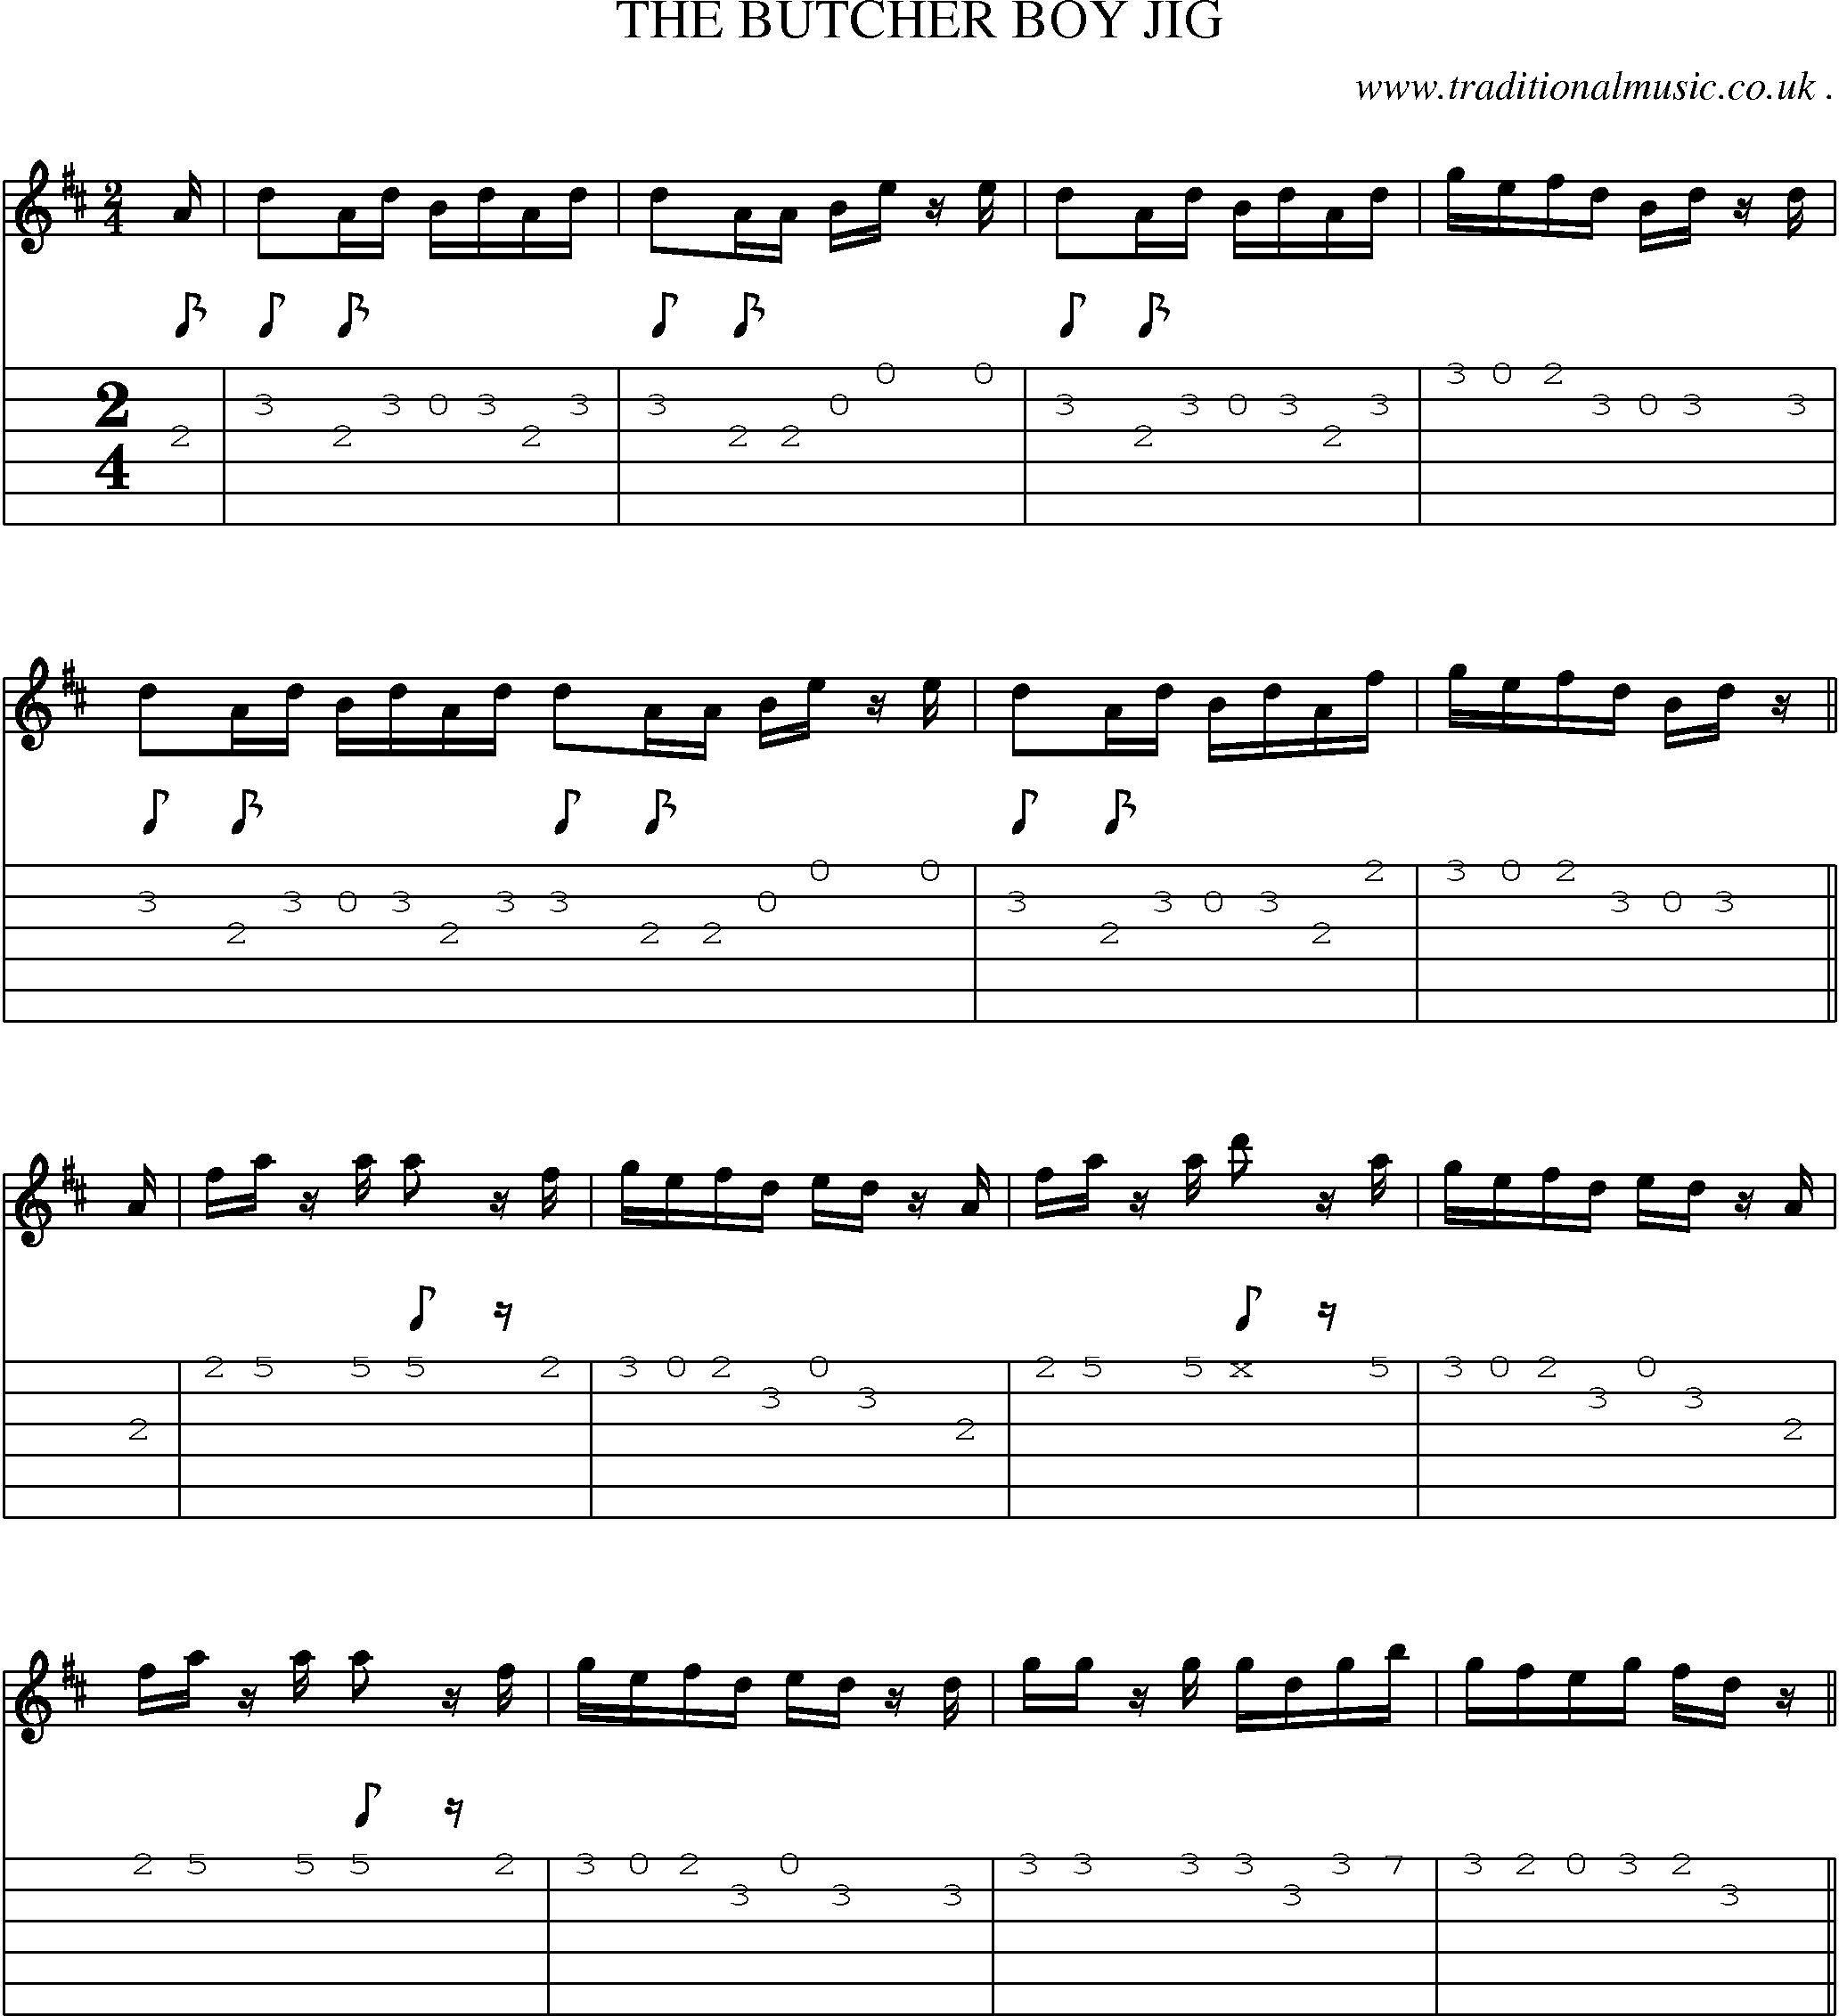 Sheet-Music and Guitar Tabs for The Butcher Boy Jig